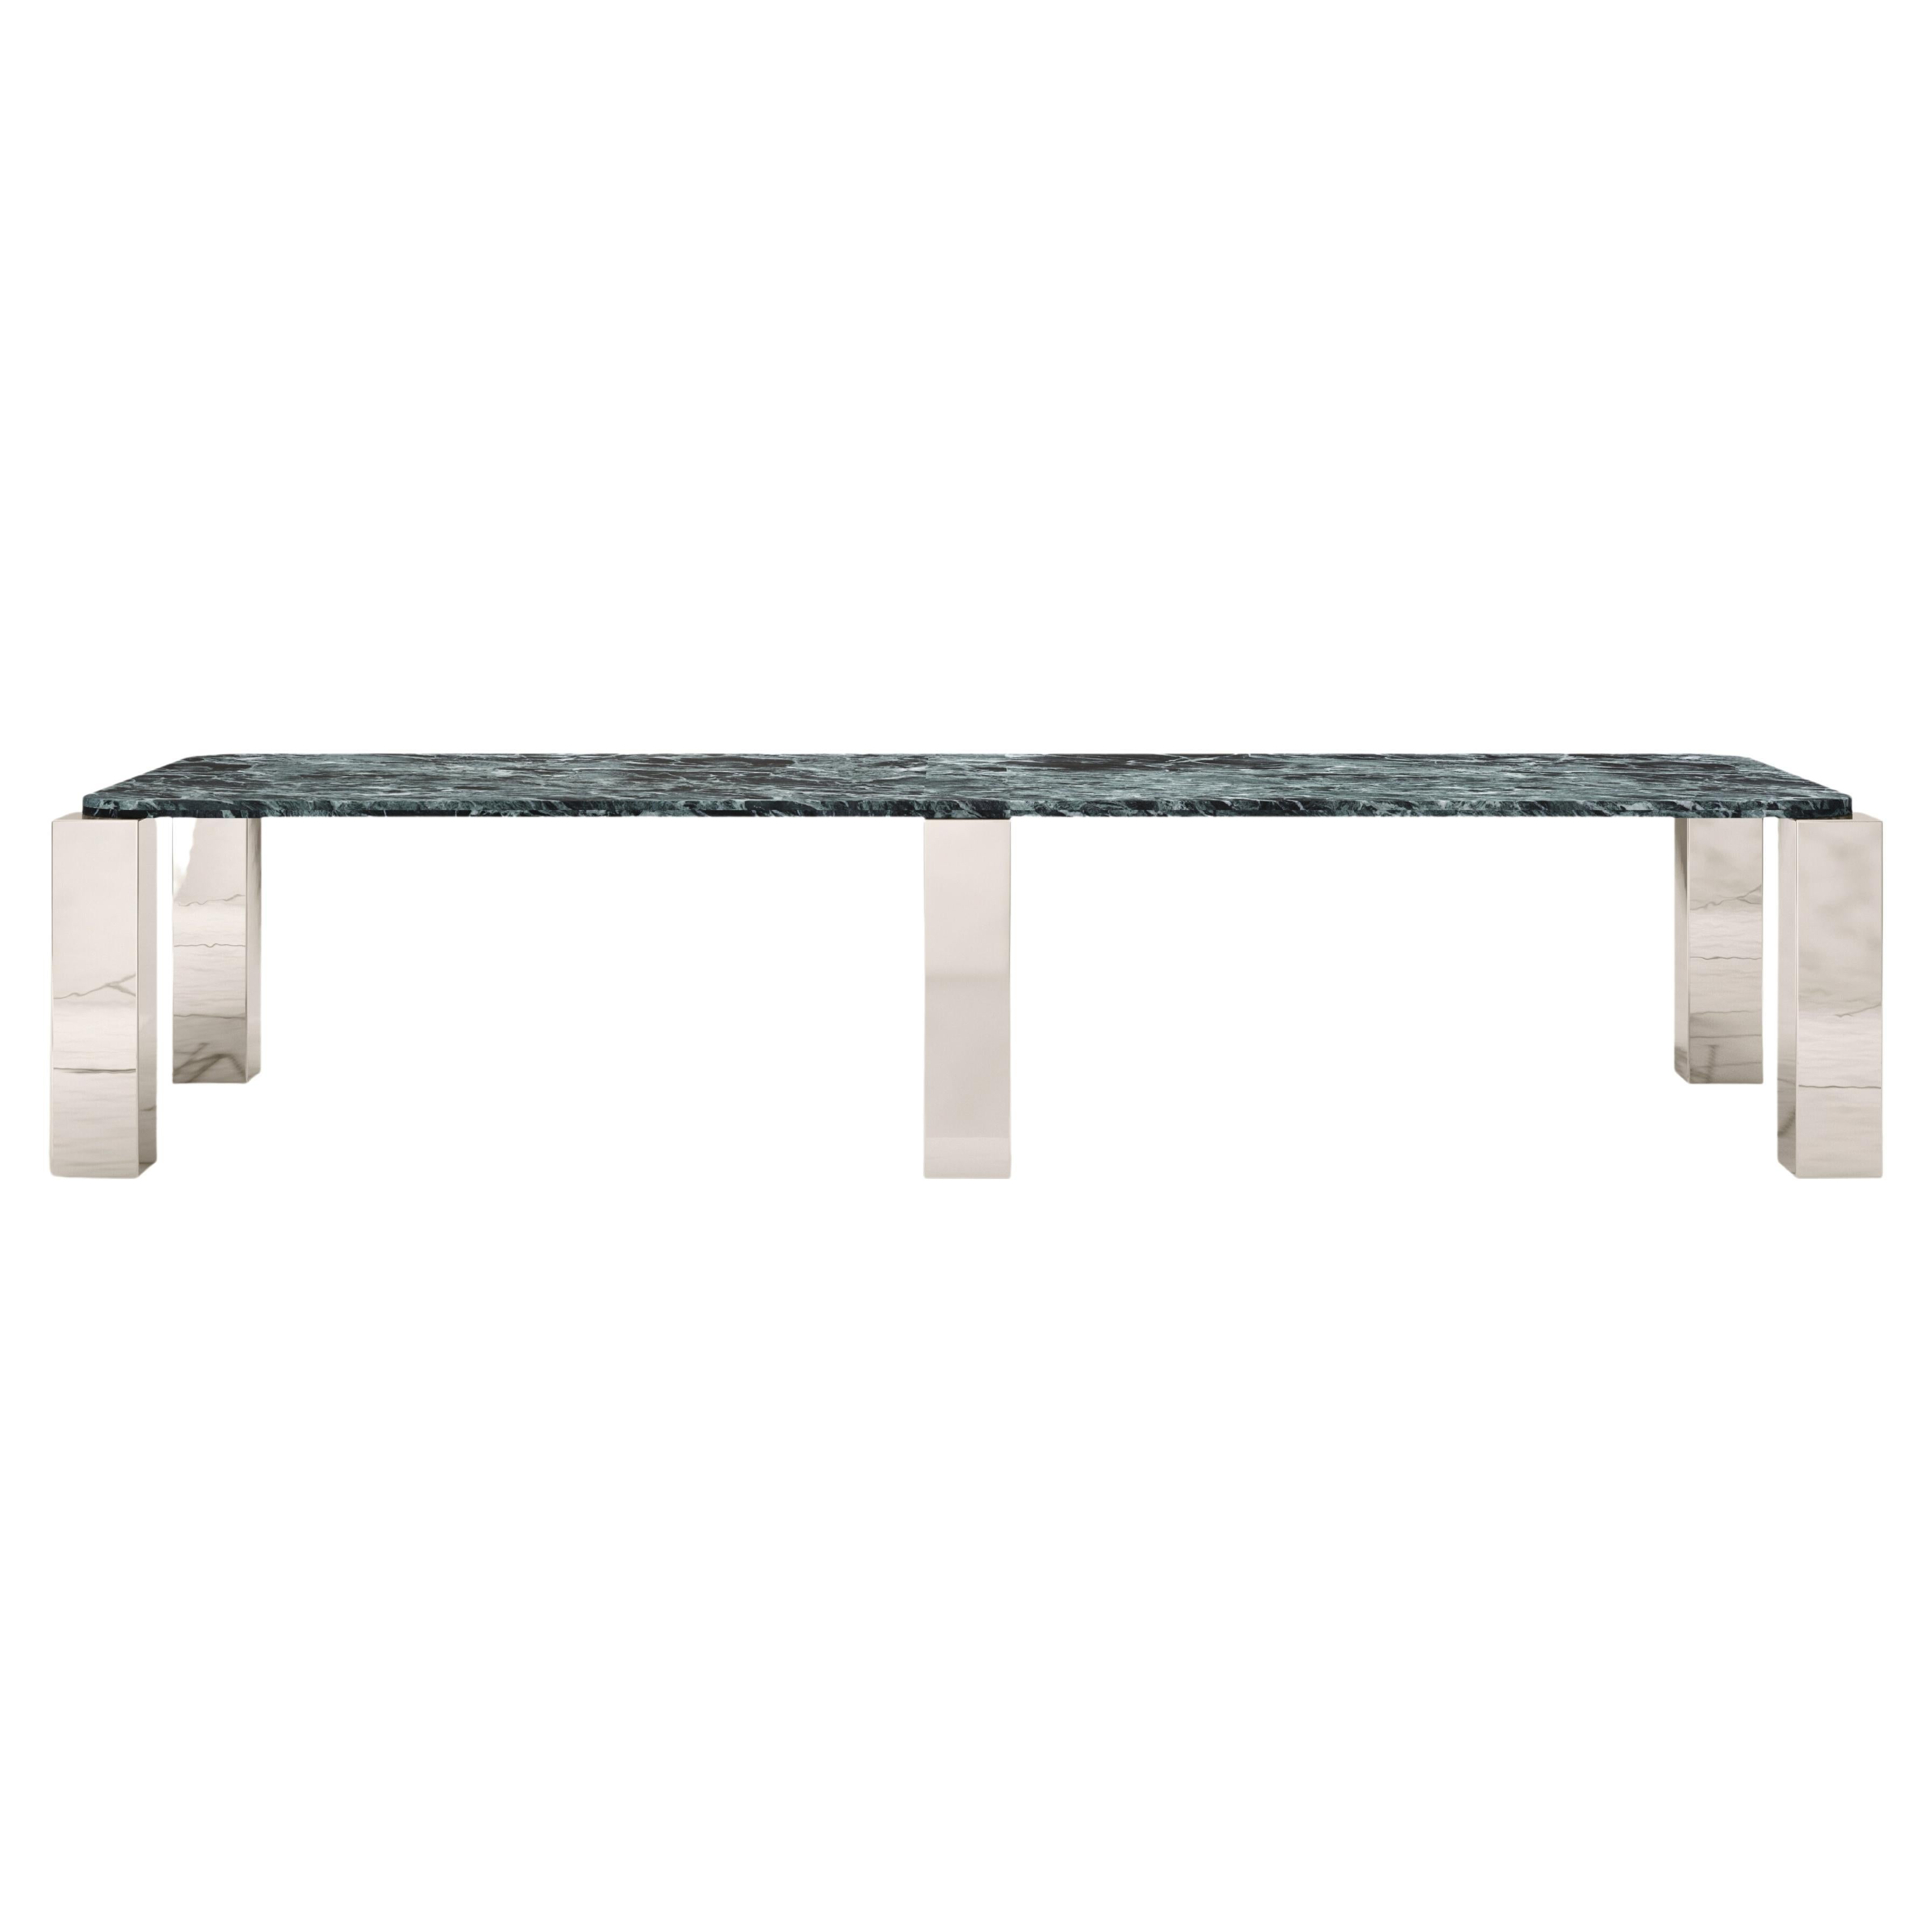 FORM(LA) Cubo Rectangle Dining Table 146”L x 50”W x 30”H Verde Marble & Chrome For Sale